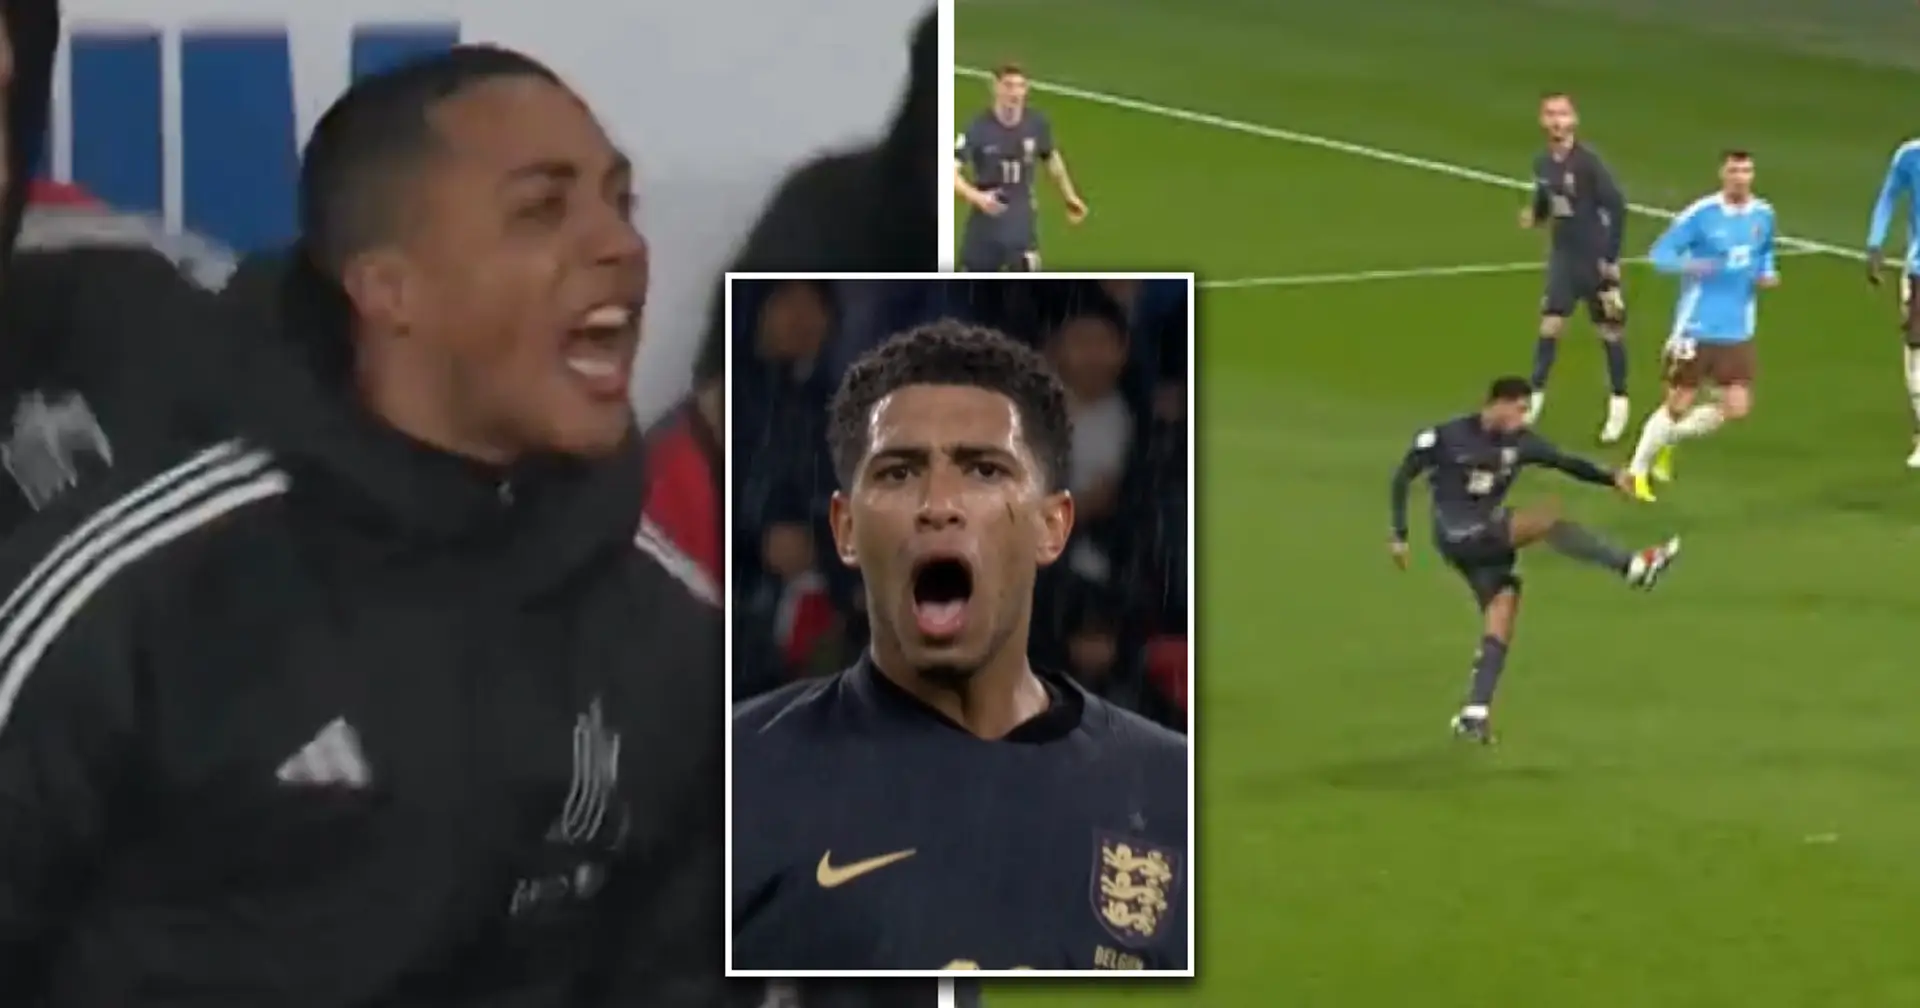 What did Youri Tielemans do after Bellingham's last-minute equaliser in England vs Belgium match?